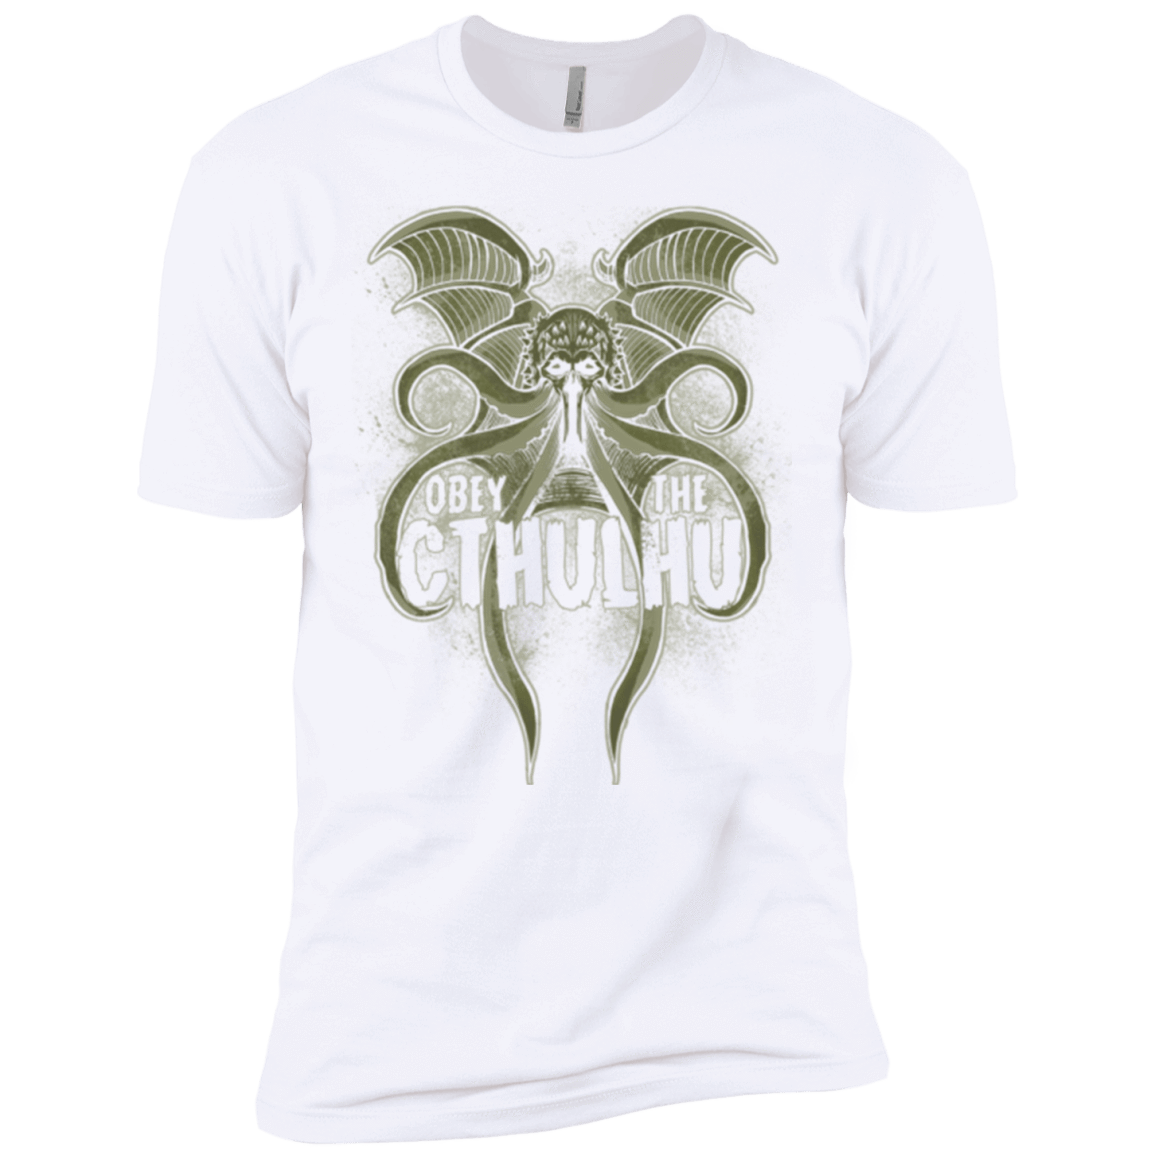 T-Shirts White / X-Small Obey the Cthulhu Men's Premium T-Shirt